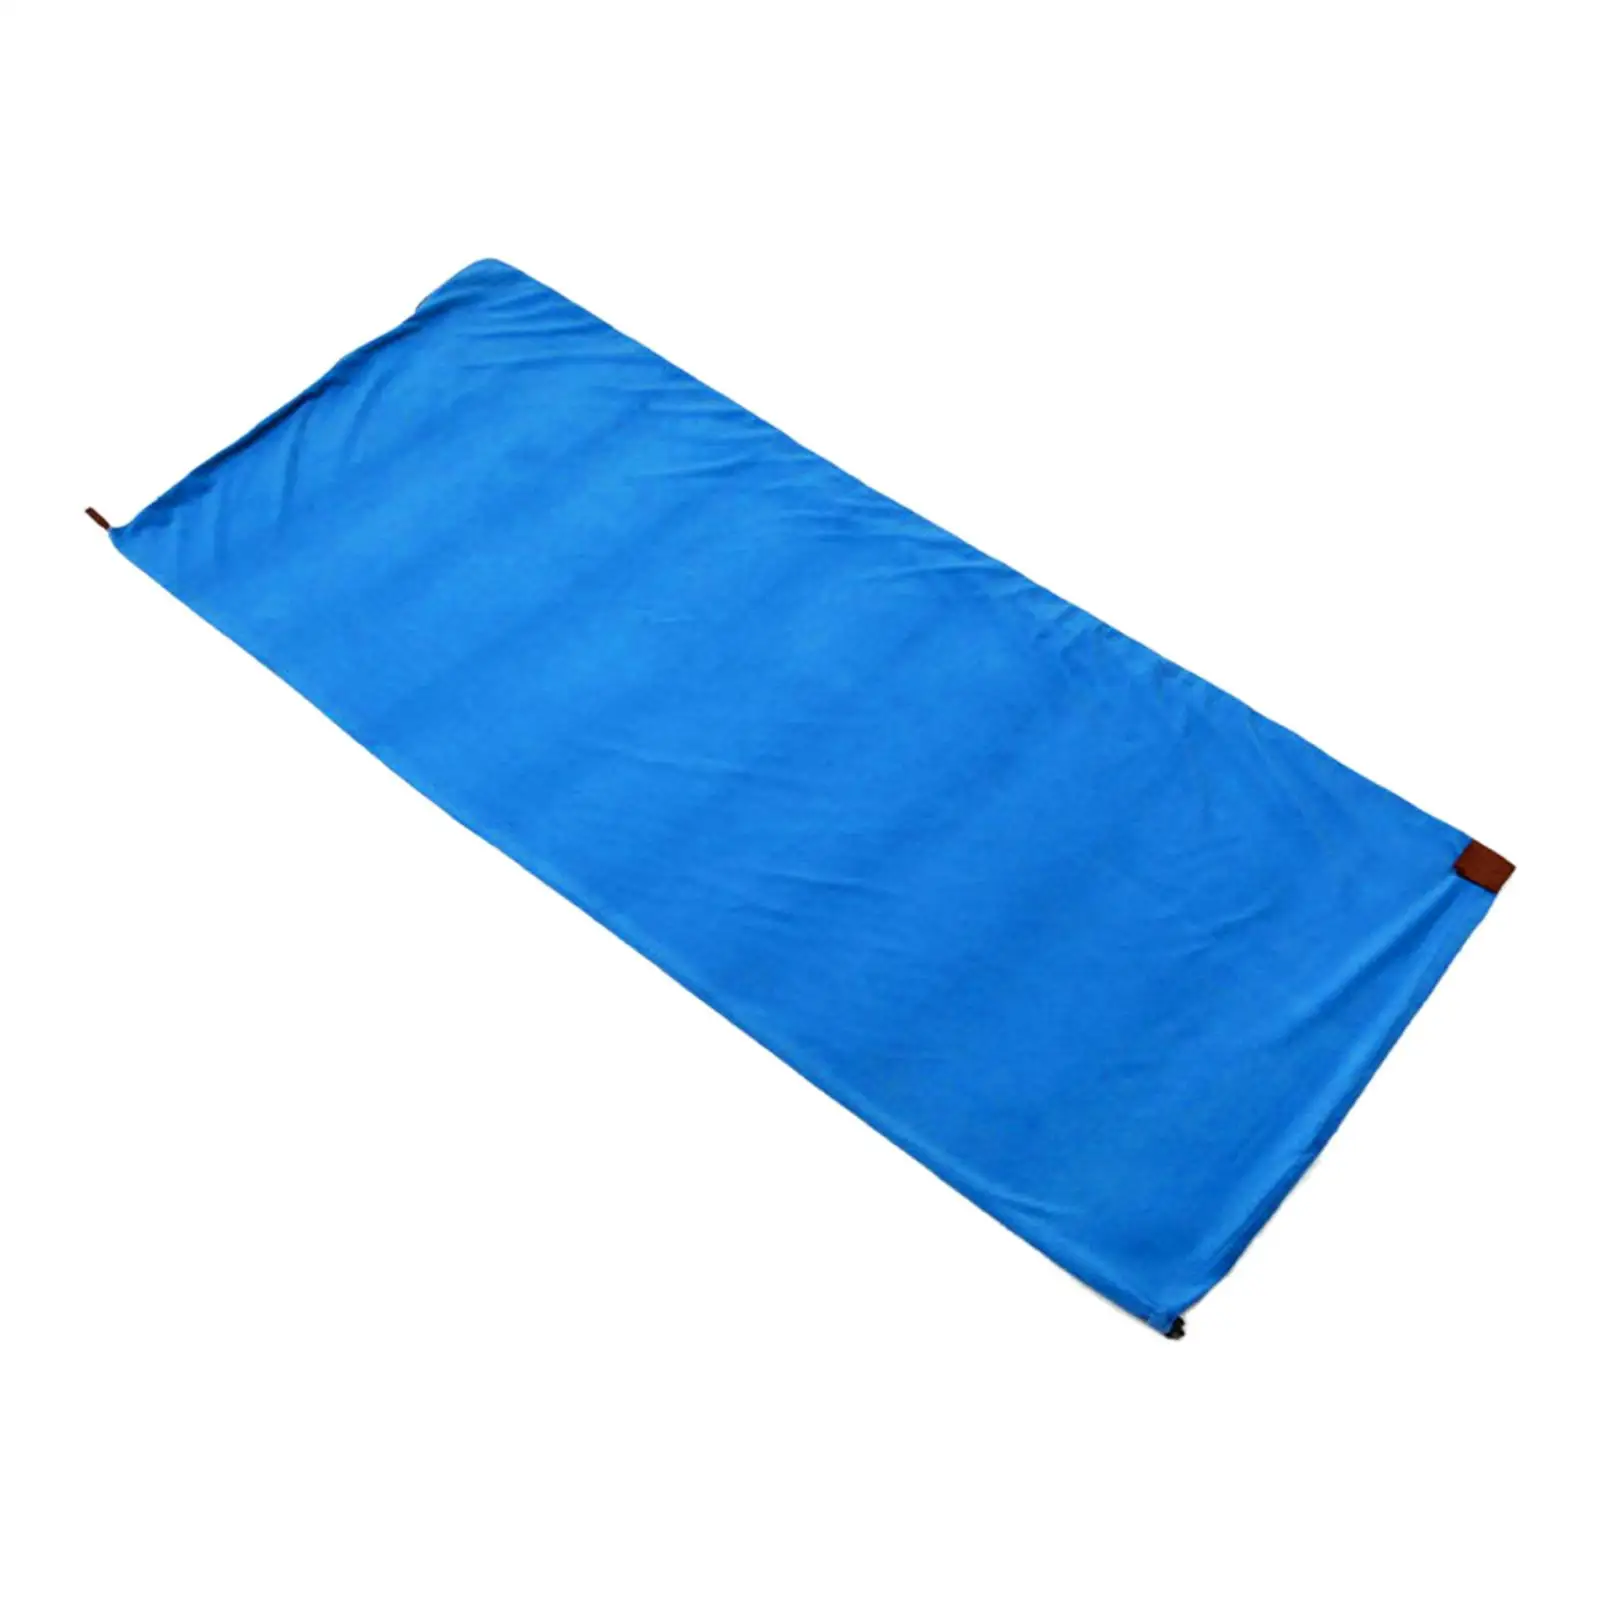 Lightweight Camping Blanket Thermal Outdoor Emergency Soft Fleece Sleeping Bag Liner for Sports Hiking Business Picnic Travel